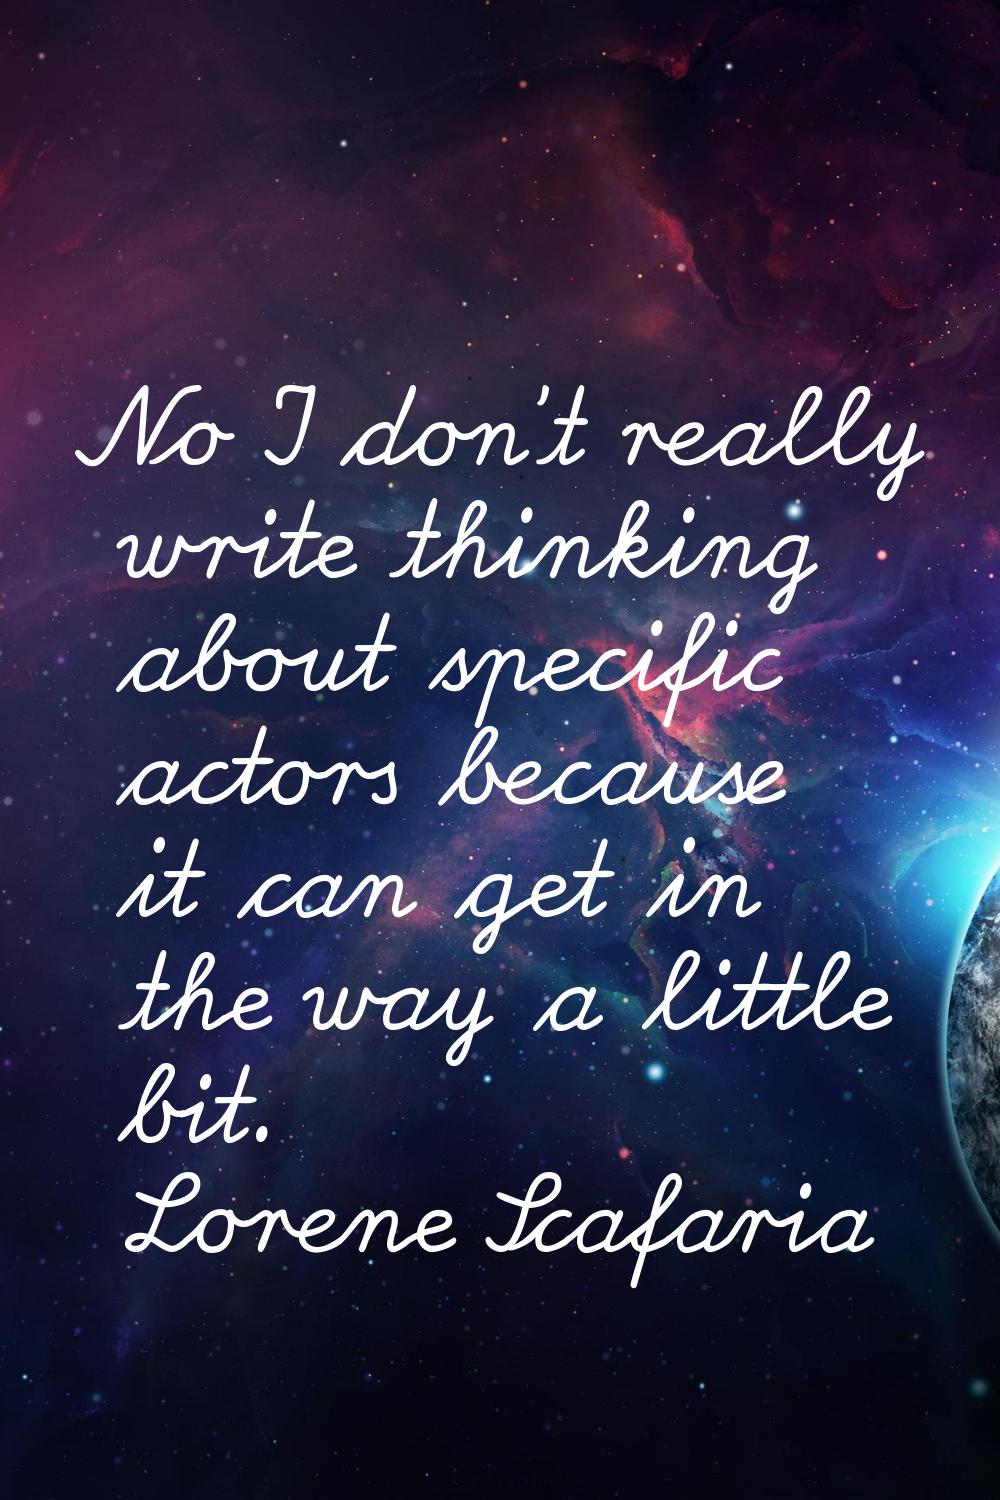 No I don't really write thinking about specific actors because it can get in the way a little bit.